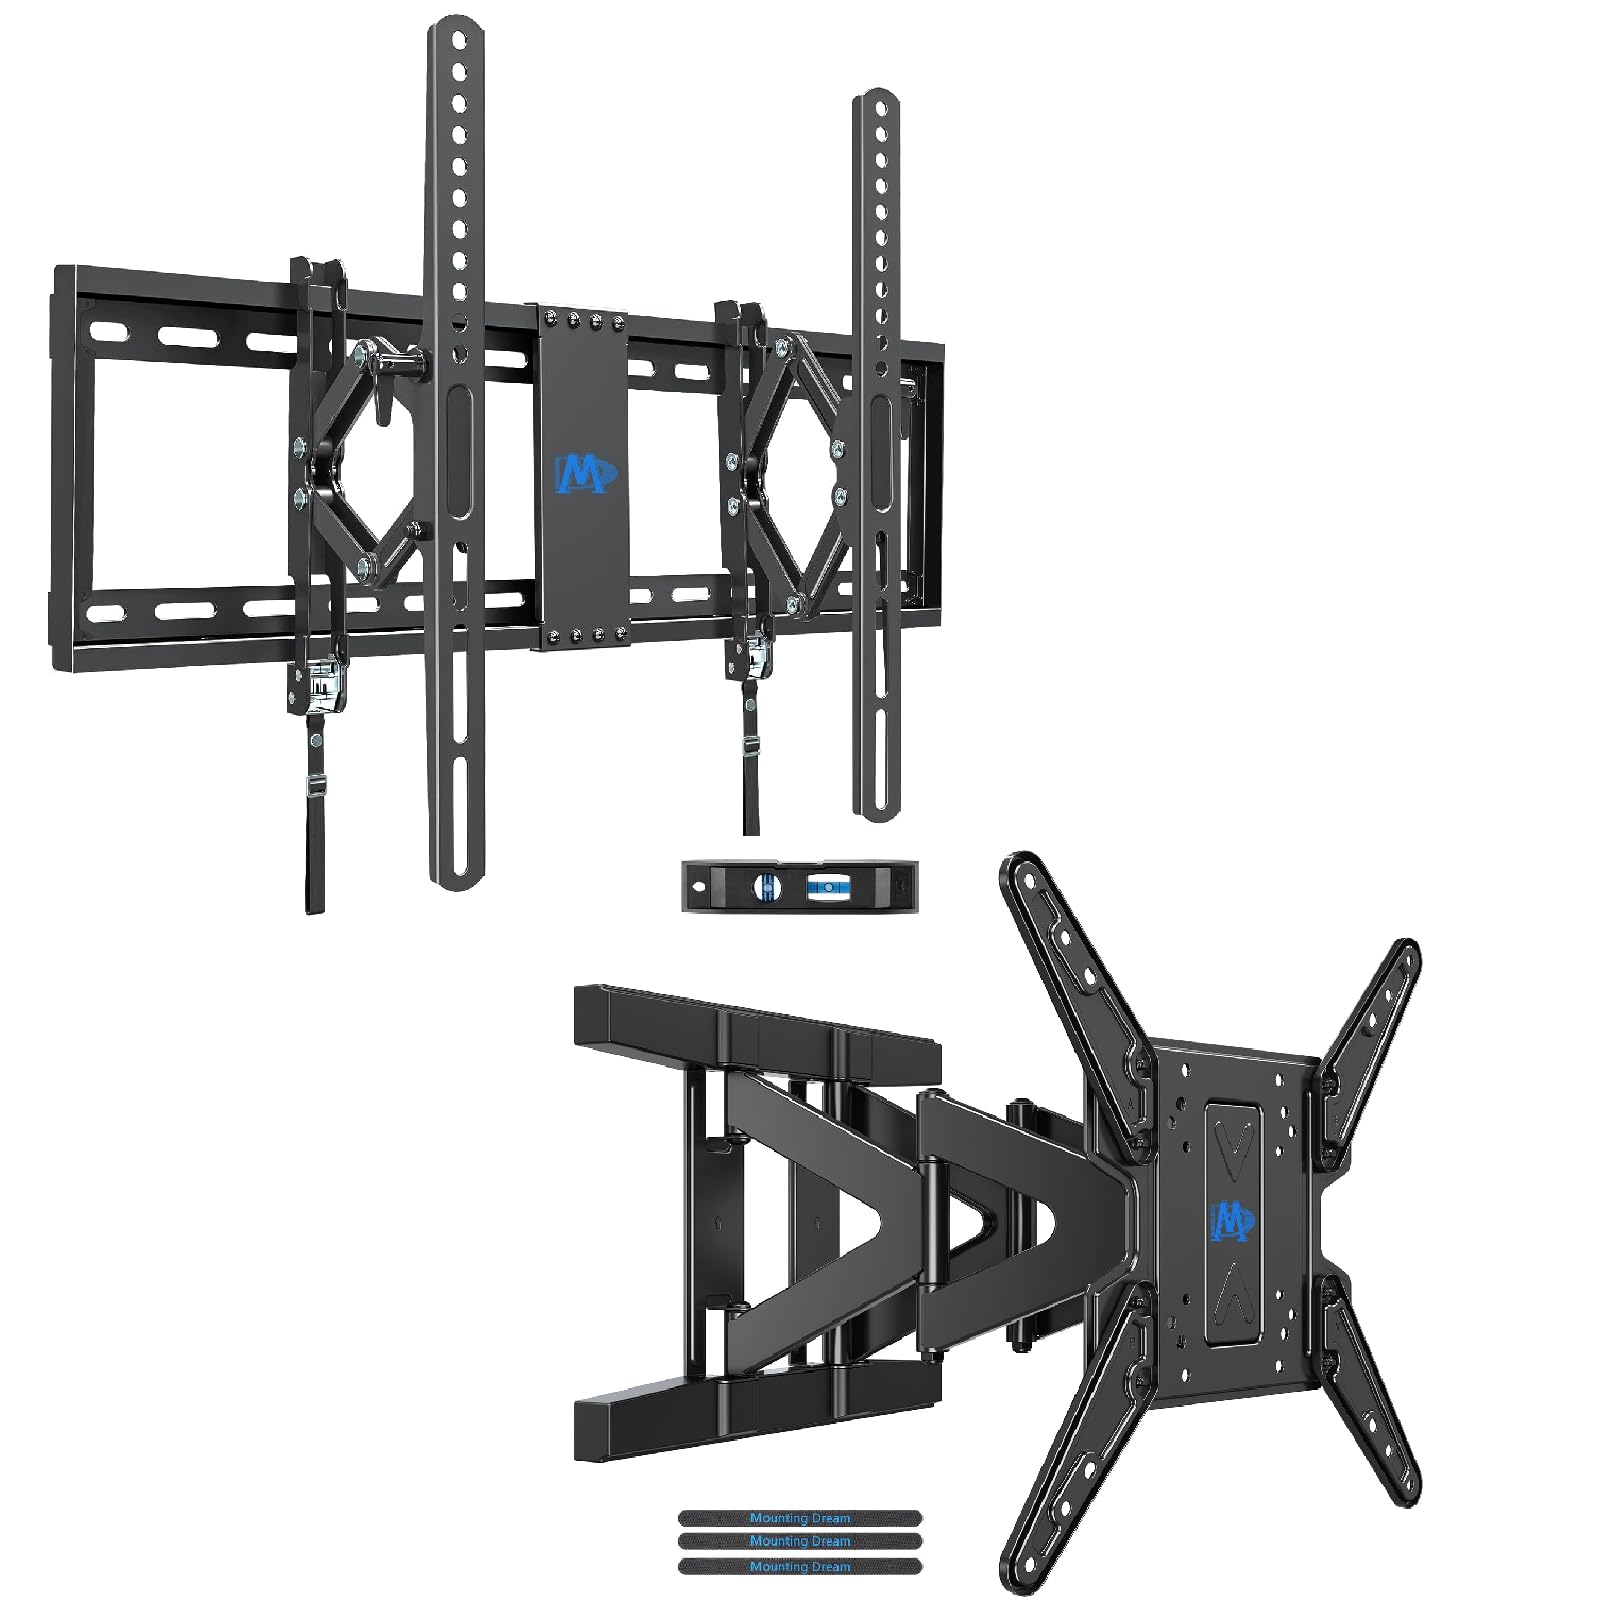 Mounting Dream UL Listed Advanced Tilt TV Wall Mount for Most 42-90 Inch TVs MD2104 and Ultra Slim Full Motion TV Wall Mount for Most 26-75 Inch TVs, up to 88lbs MD2801-M